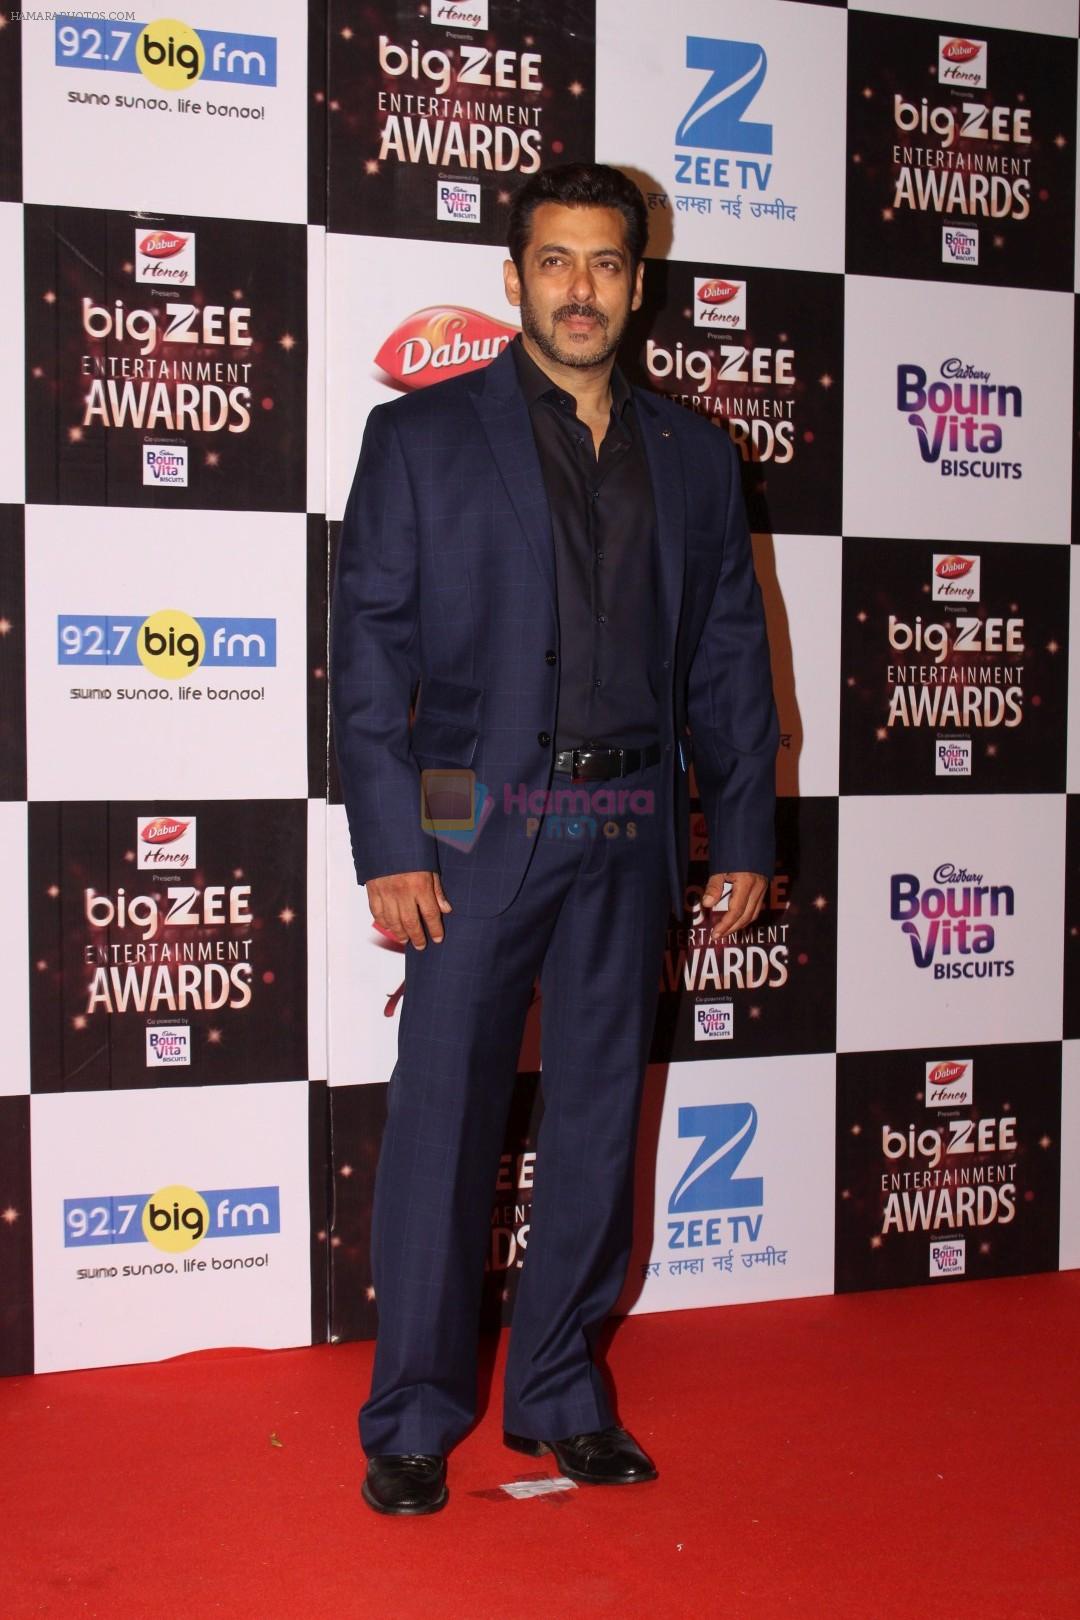 Salman Khan At Red Carpet Of Big Zee Entertainment Awards 2017 on 29th July 2017